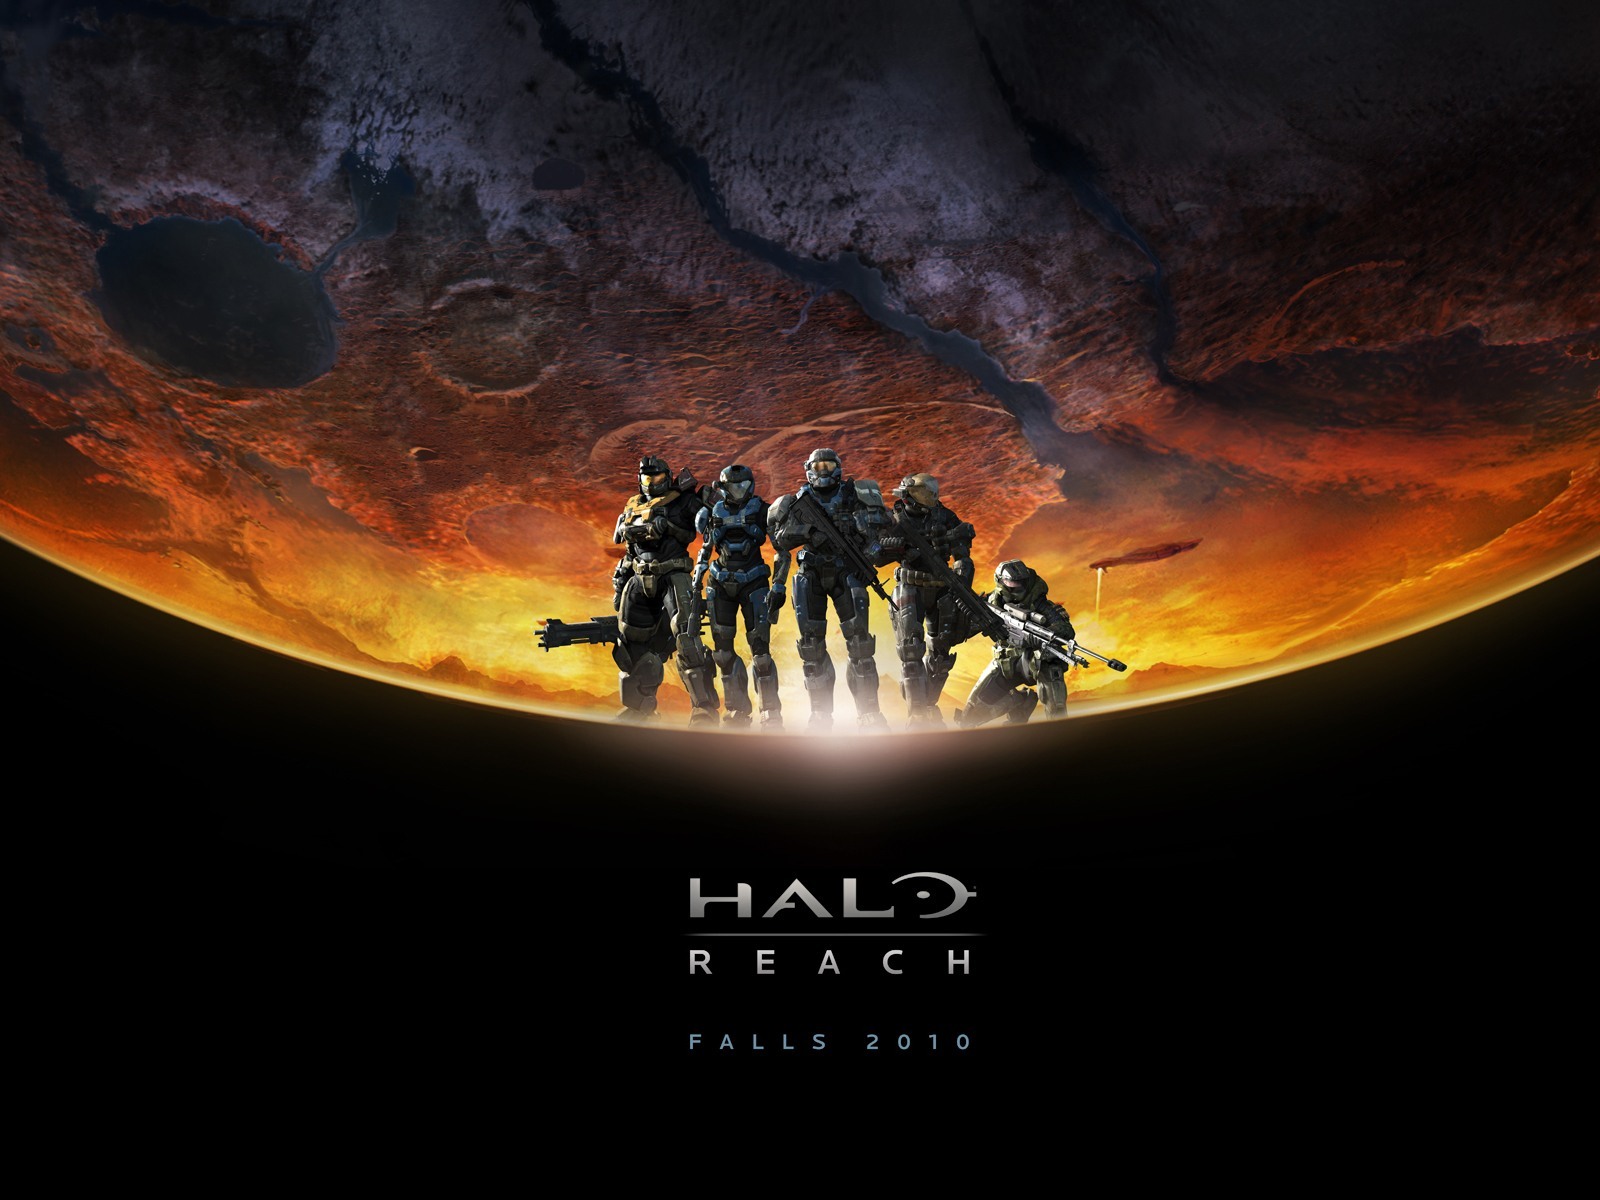 Halo game HD wallpapers #27 - 1600x1200